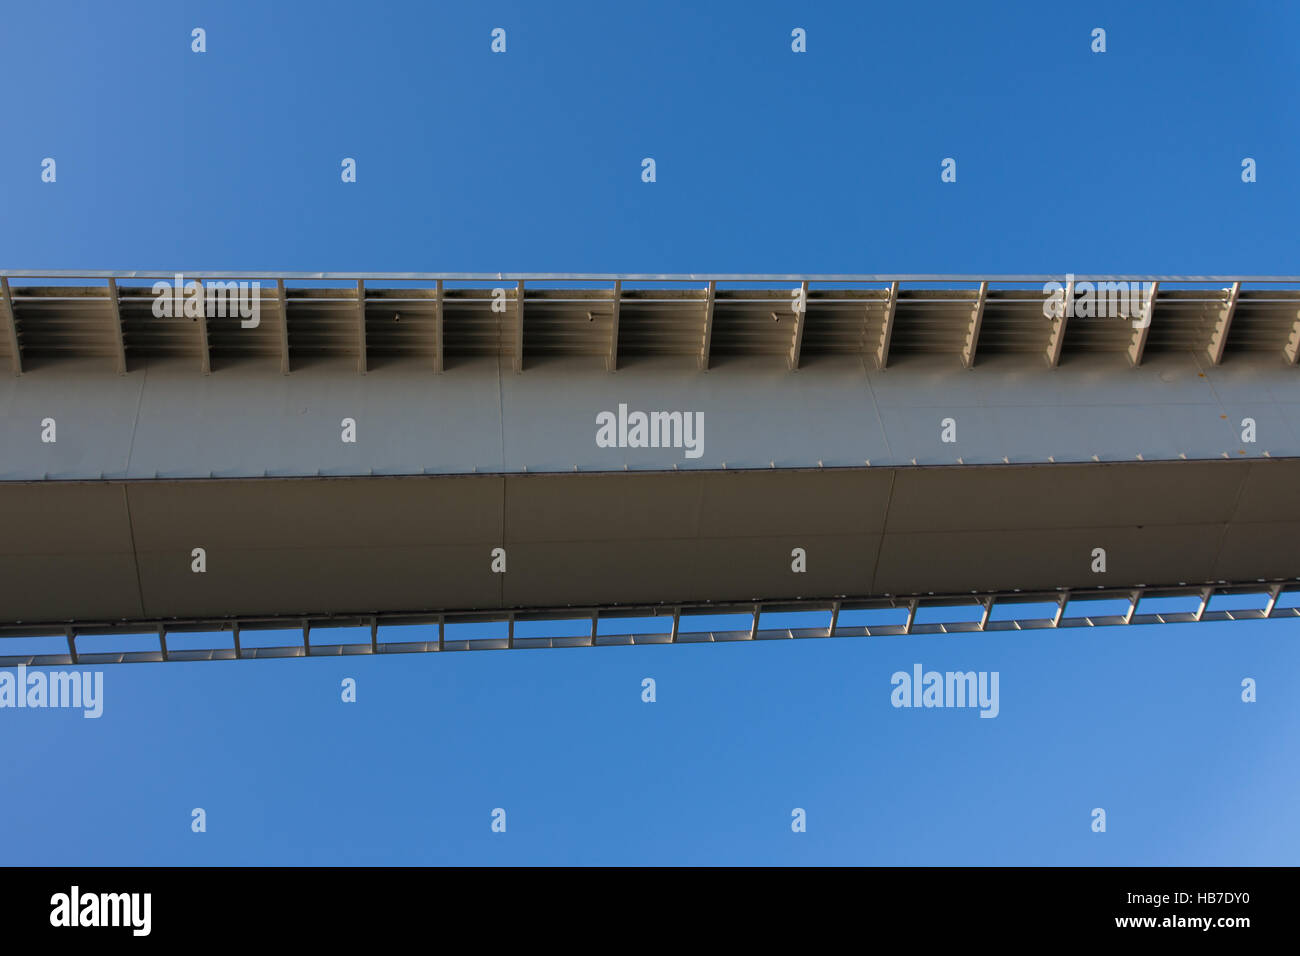 Quirky but interesting shot of the underside of a section of bridge looking angular and modern against a clear blue sky Stock Photo